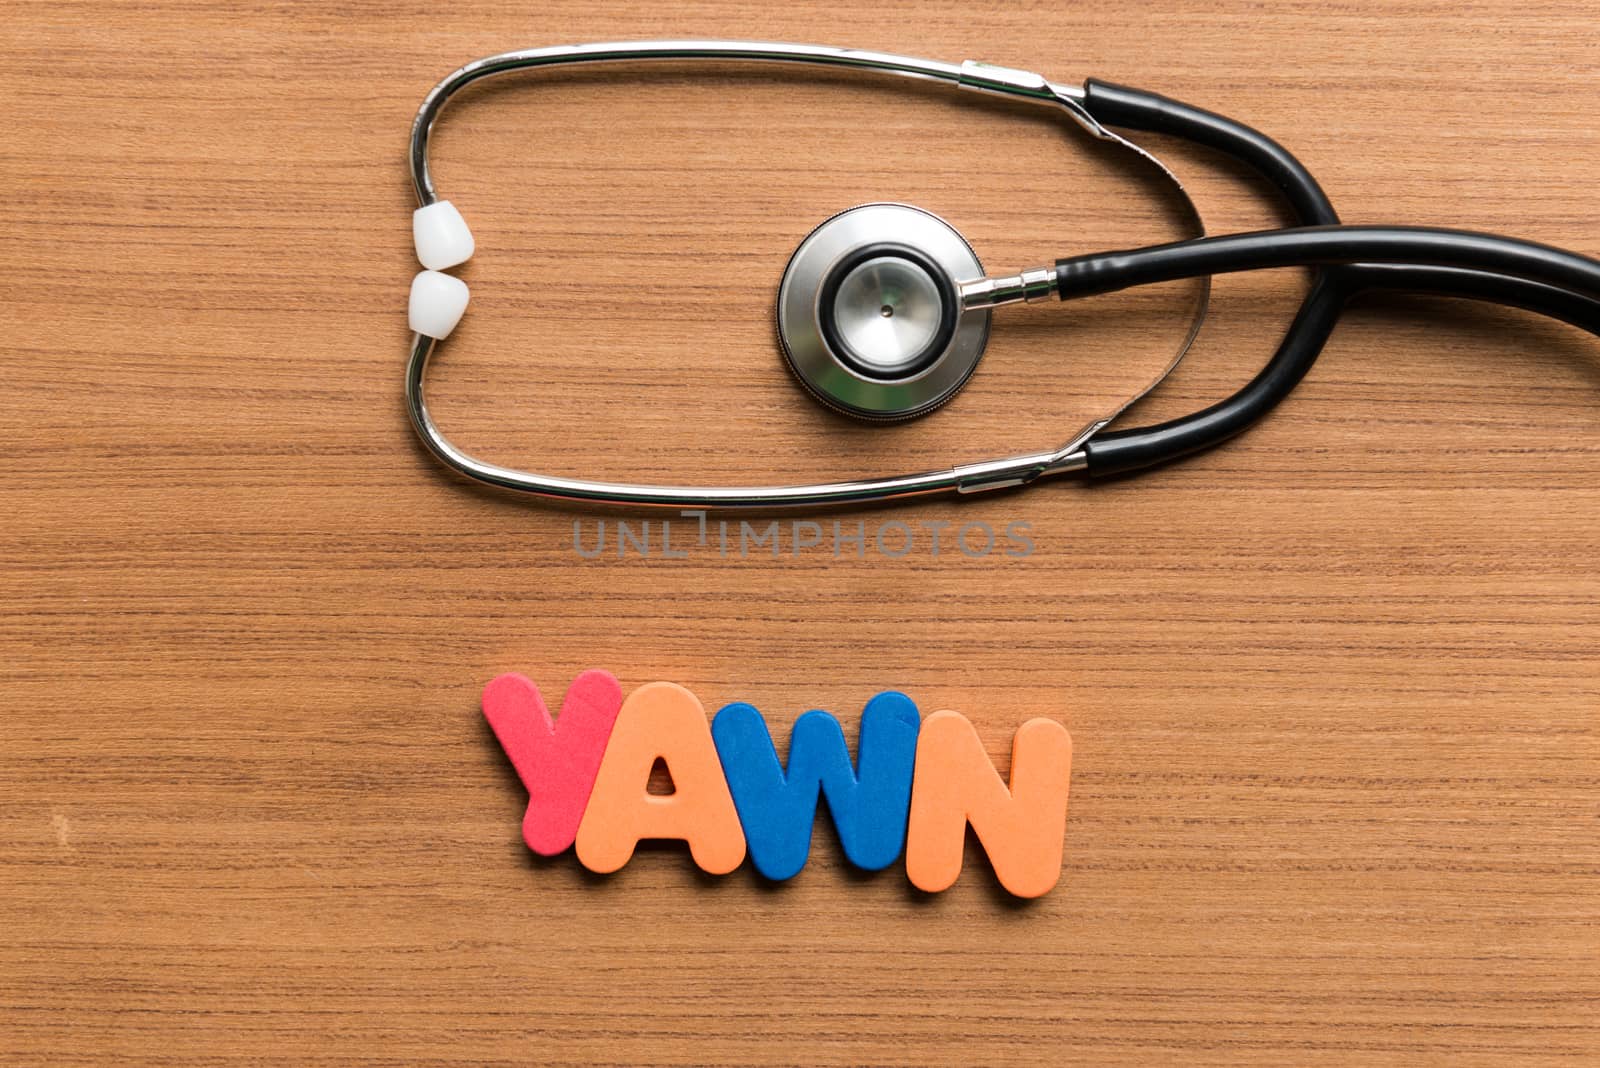 yawn colorful word with stethoscope on wooden background